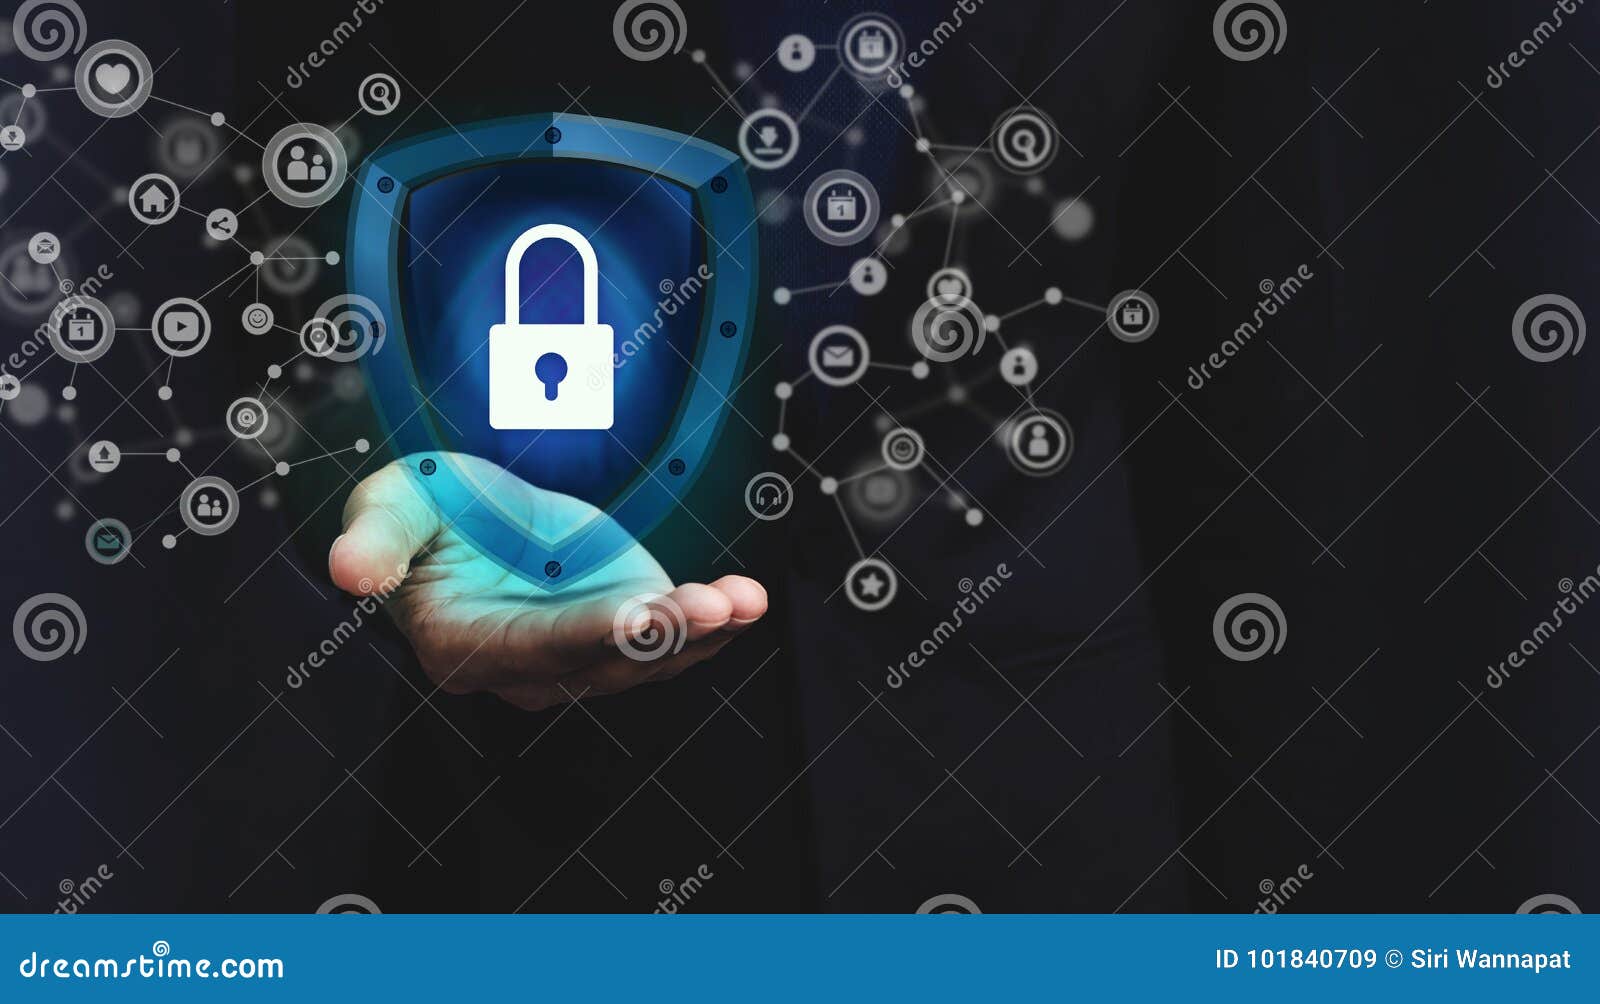 network security system concept, locked key inside a shield guard to protected identify or personal information from cyber attack